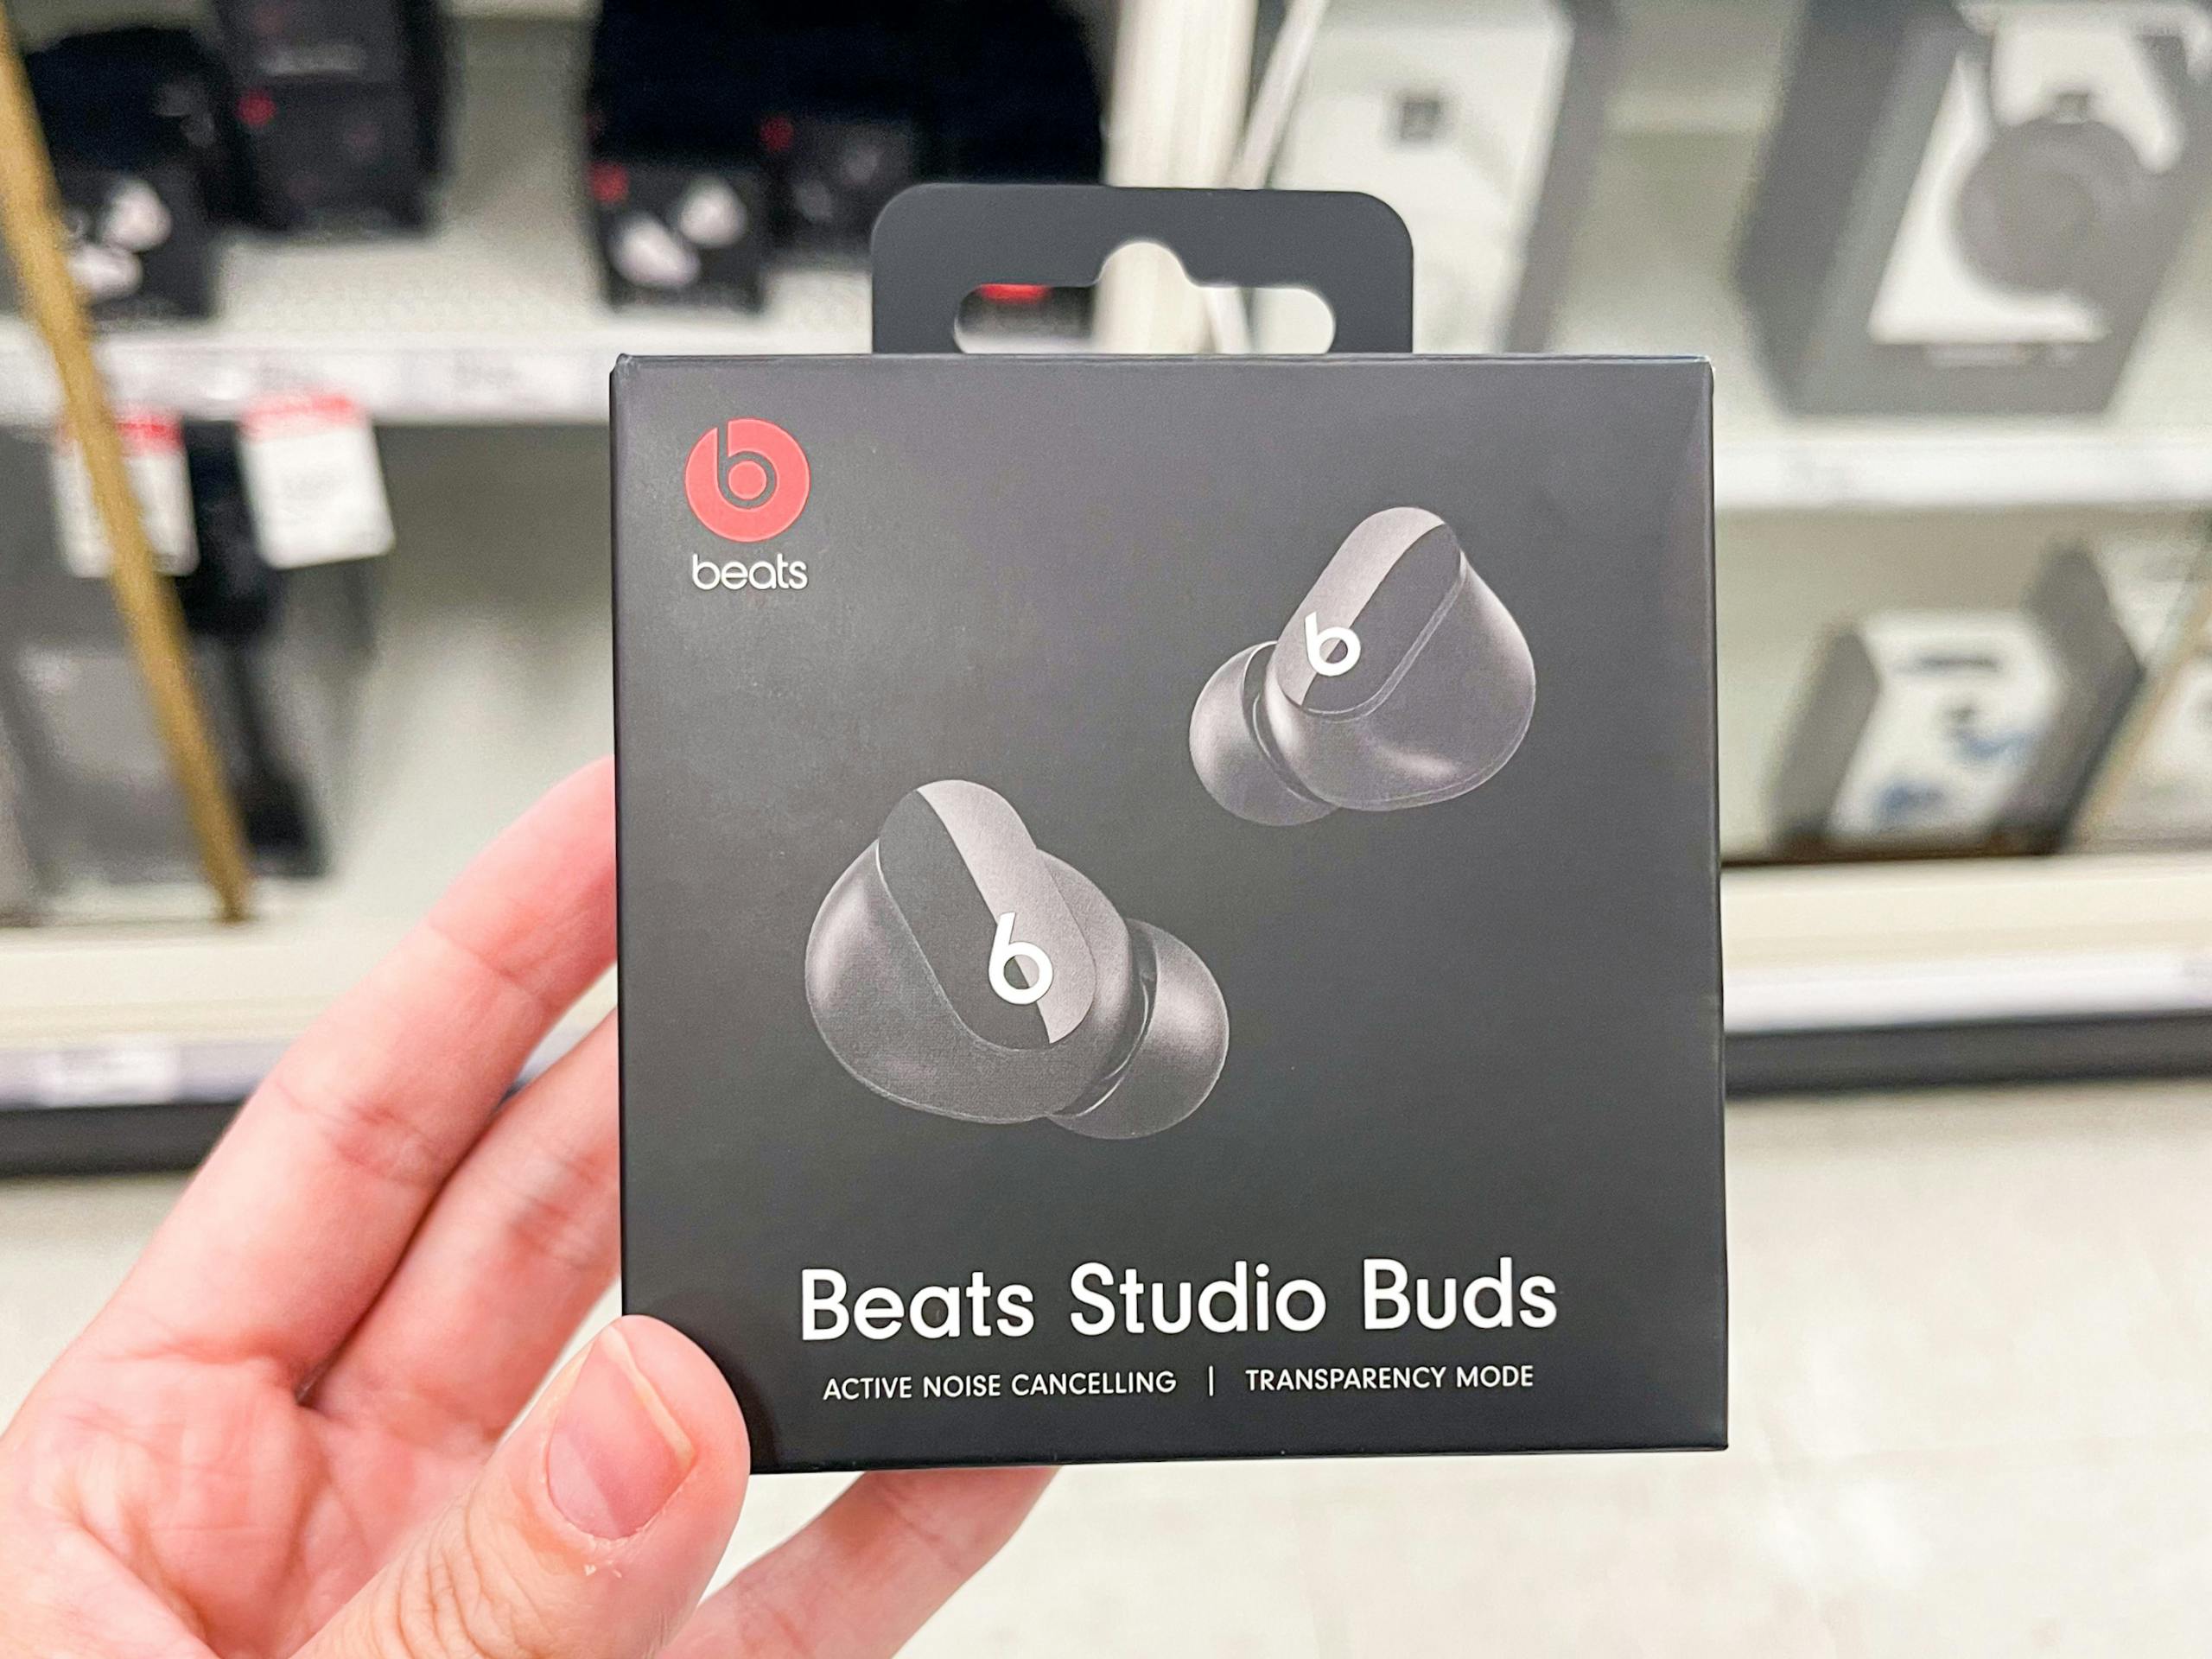 A Beats Studio Buds held out by hand.